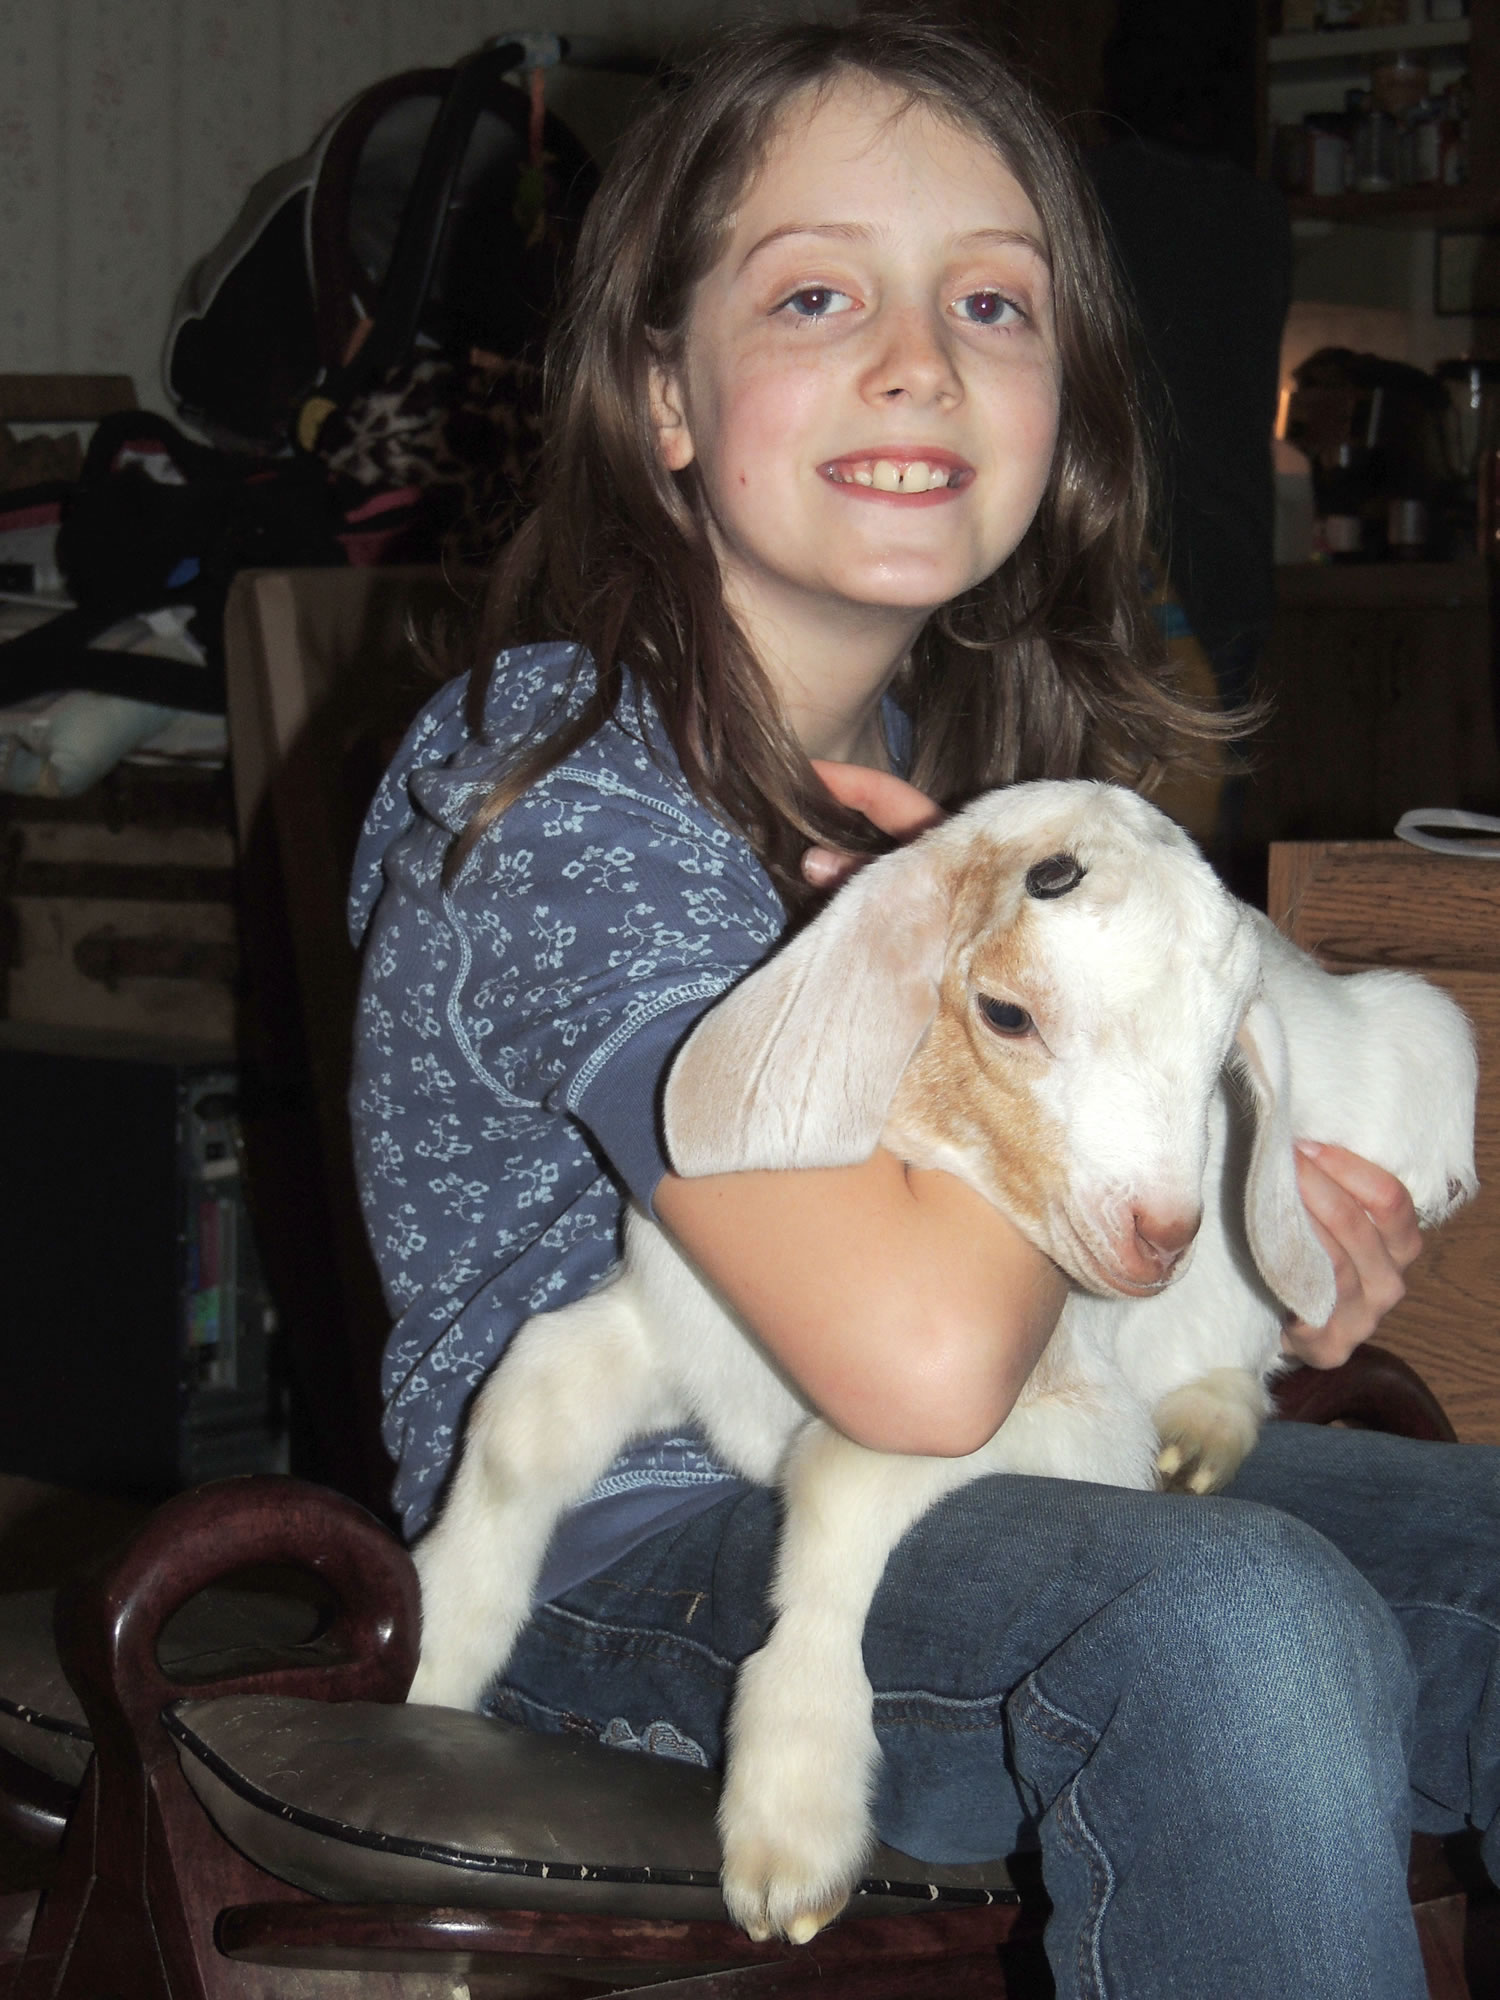 Photos courtesy Jolene Scott
Clark County 4-H member Zoey Scott, 8, holds her goat Creamy. The goat was found wandering free at the Scott family's Battle Ground-area property June 19. The other three goats Zoey and her family were raising could not be found. Mother Jolene Scott believes they were stolen. Creamy might have been left behind because, &quot;he is the annoying one that's harder to catch,&quot; Jolene Scott said.